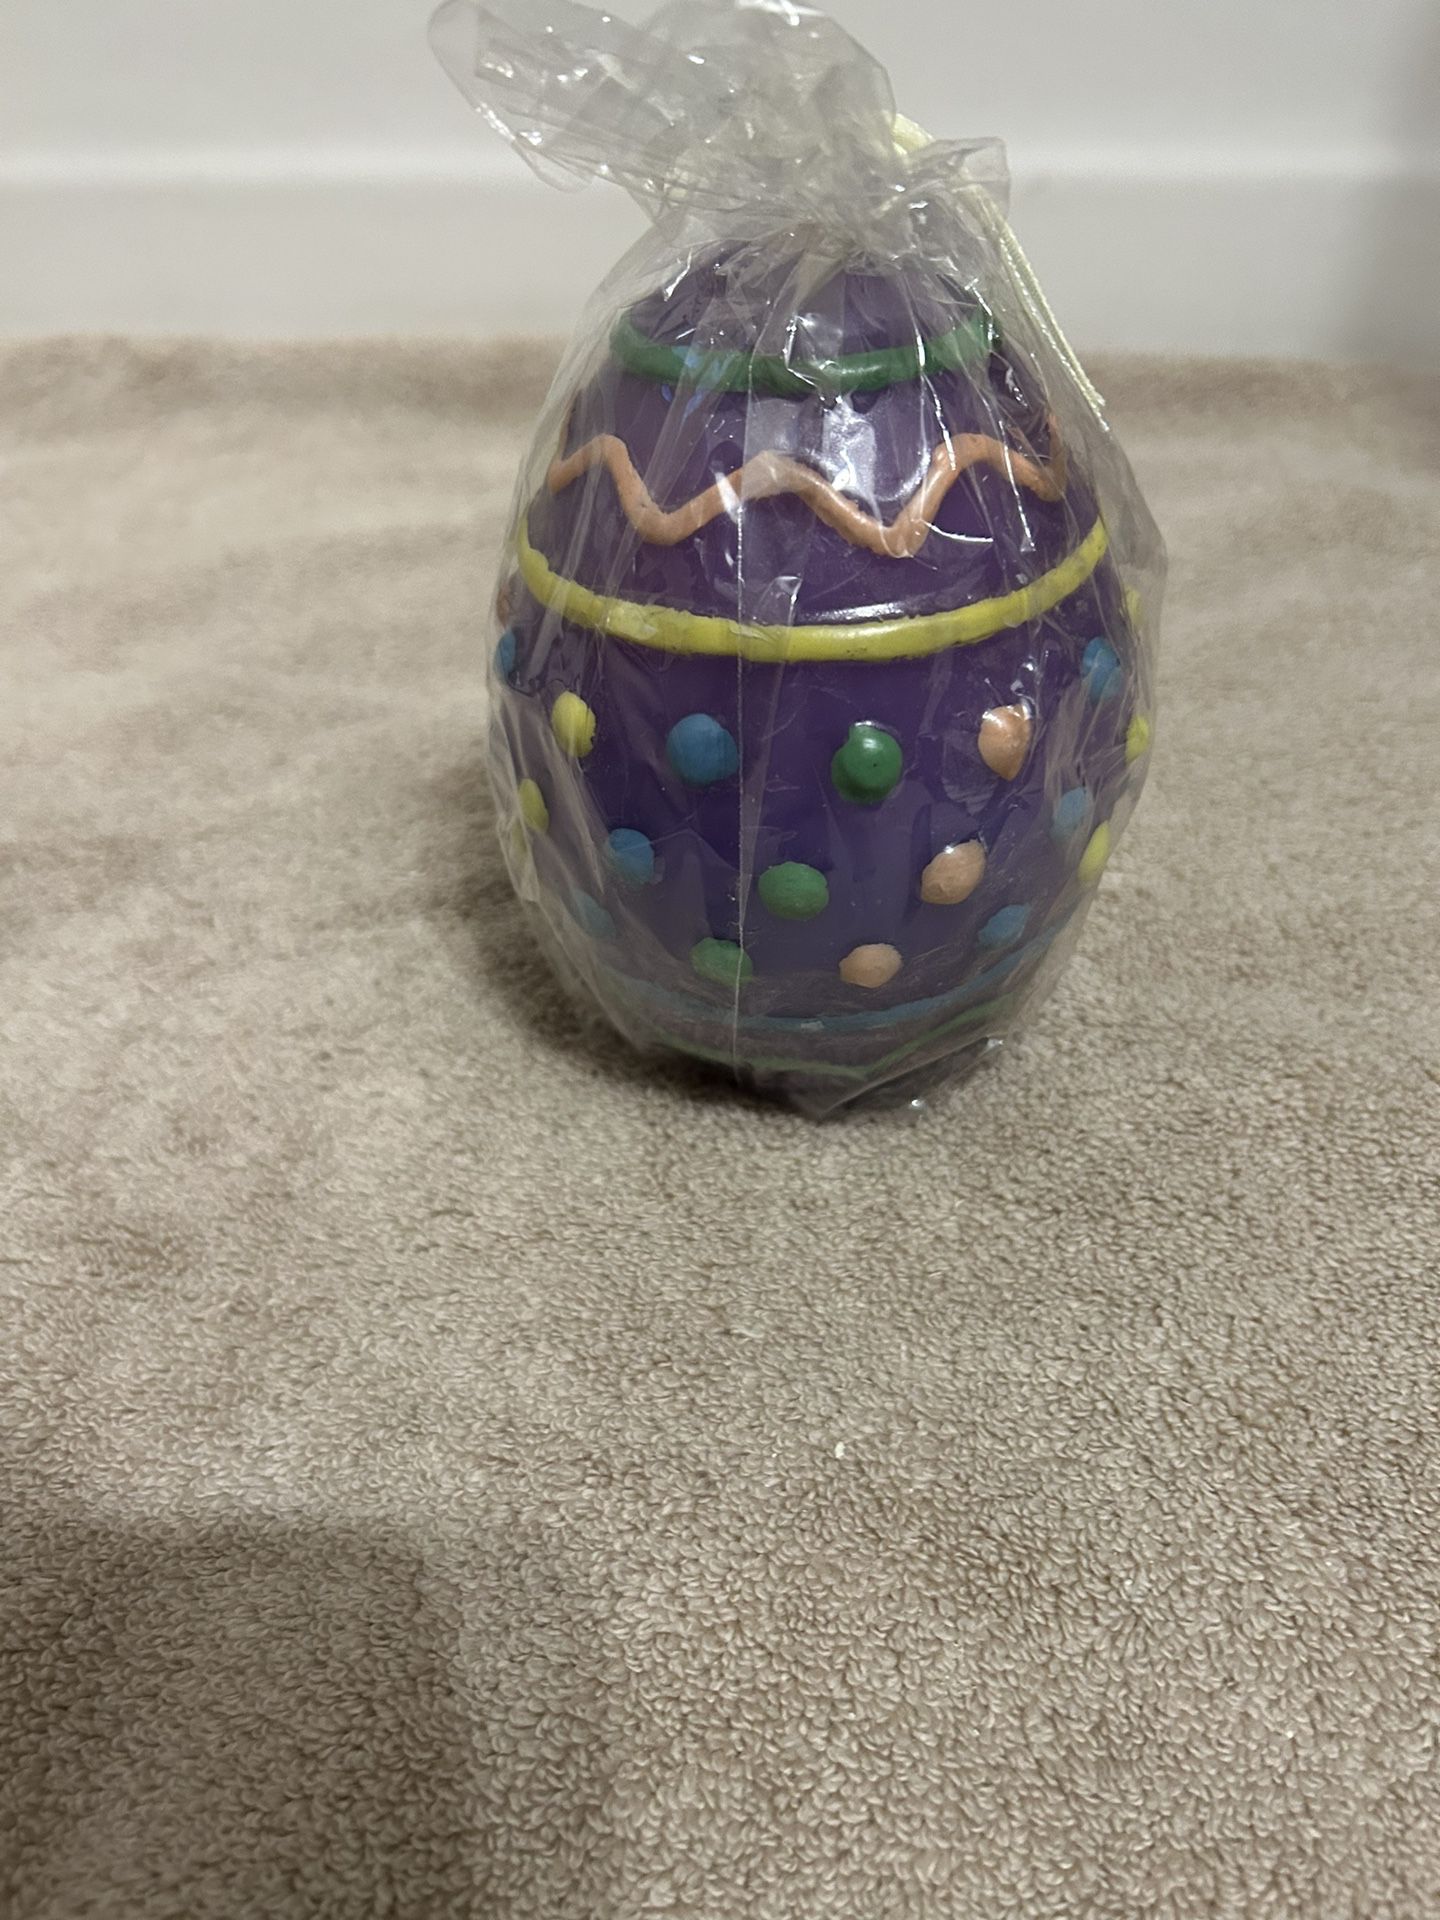 Easter Egg Candle